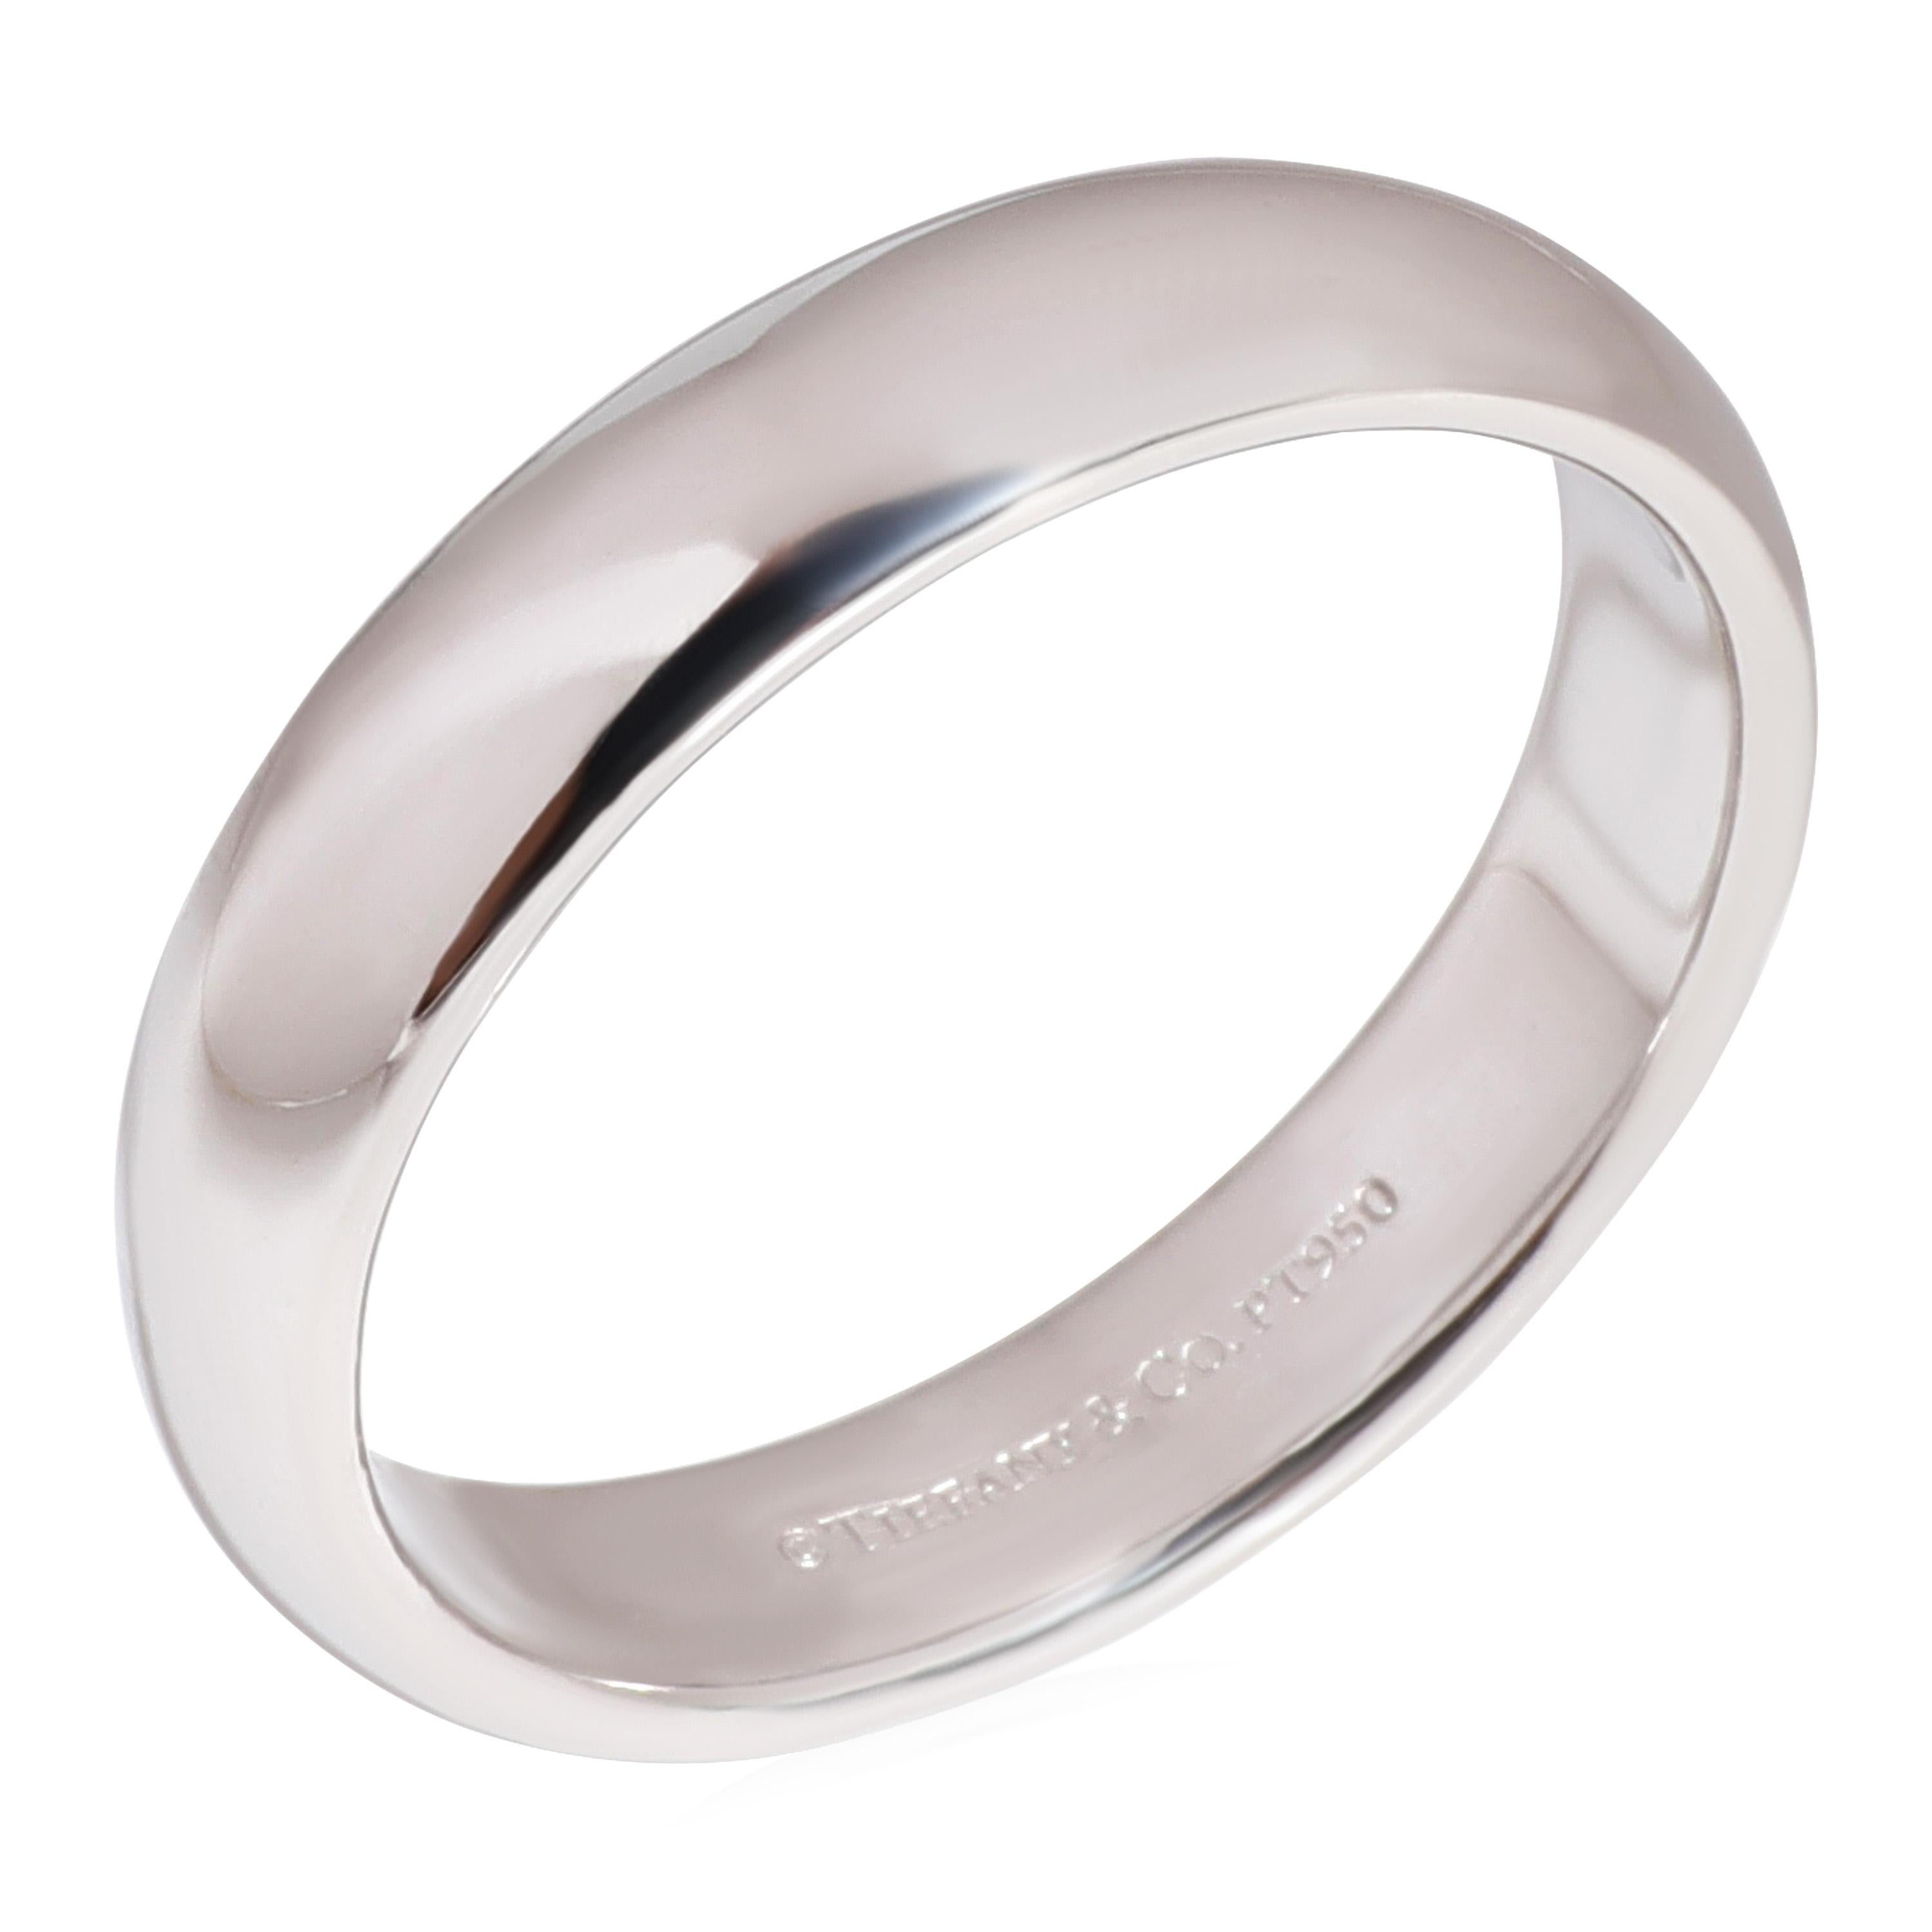 Tiffany & Co. Tiffany Classic Wedding Band in Platinum

PRIMARY DETAILS
SKU: 121537
Listing Title: Tiffany & Co. Tiffany Classic Wedding Band in Platinum
Condition Description: Retails for 1800 USD. In excellent condition and recently polished. Ring